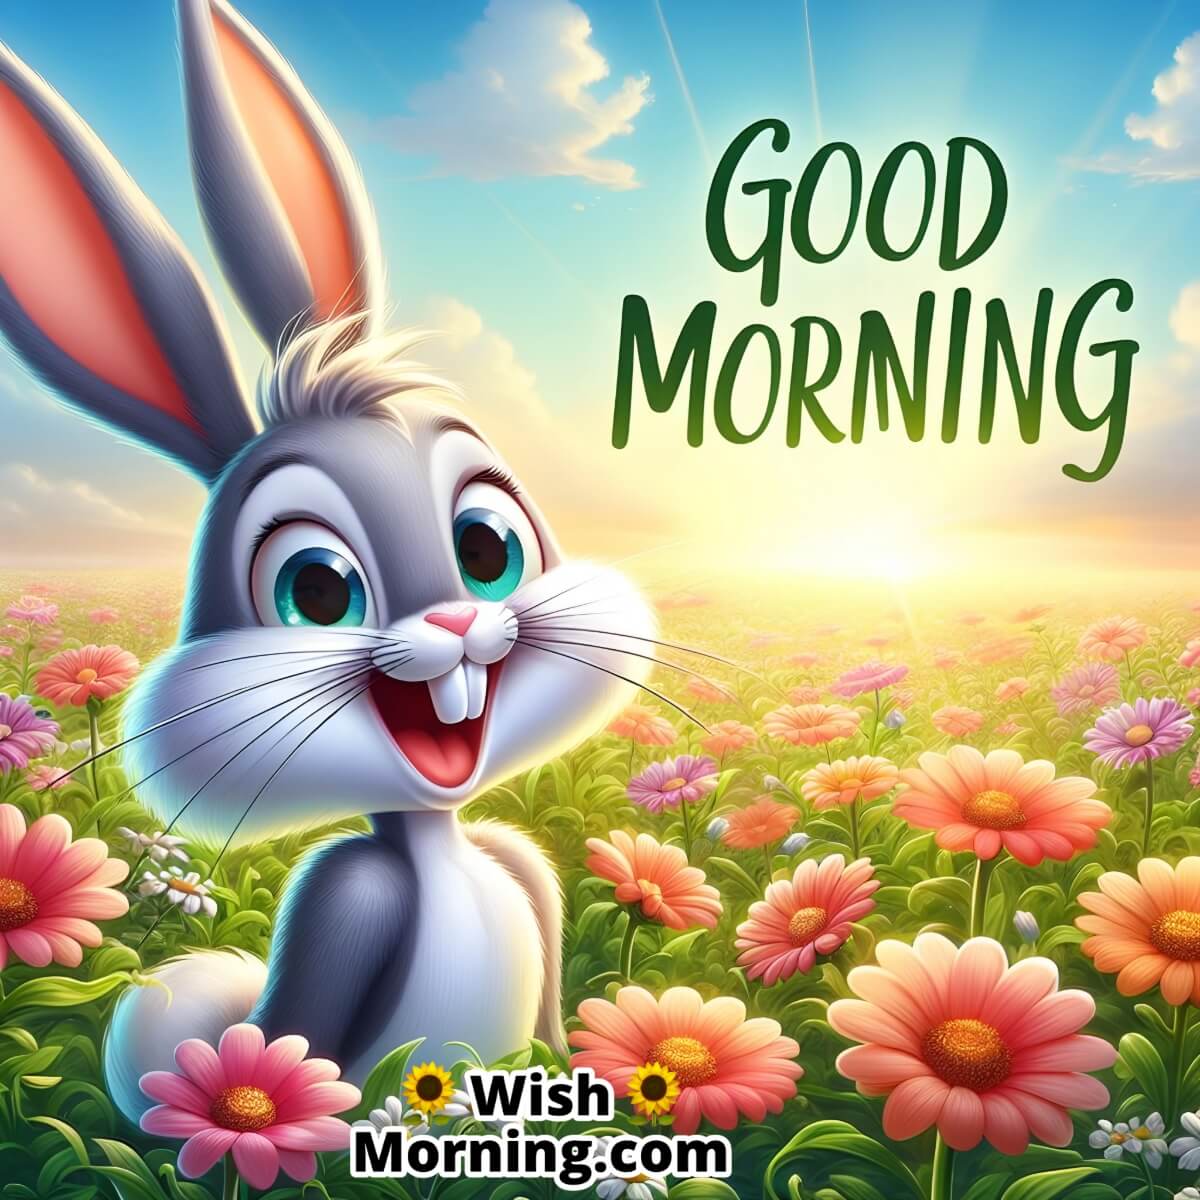 Good Morning Bugs Bunny In Flowers